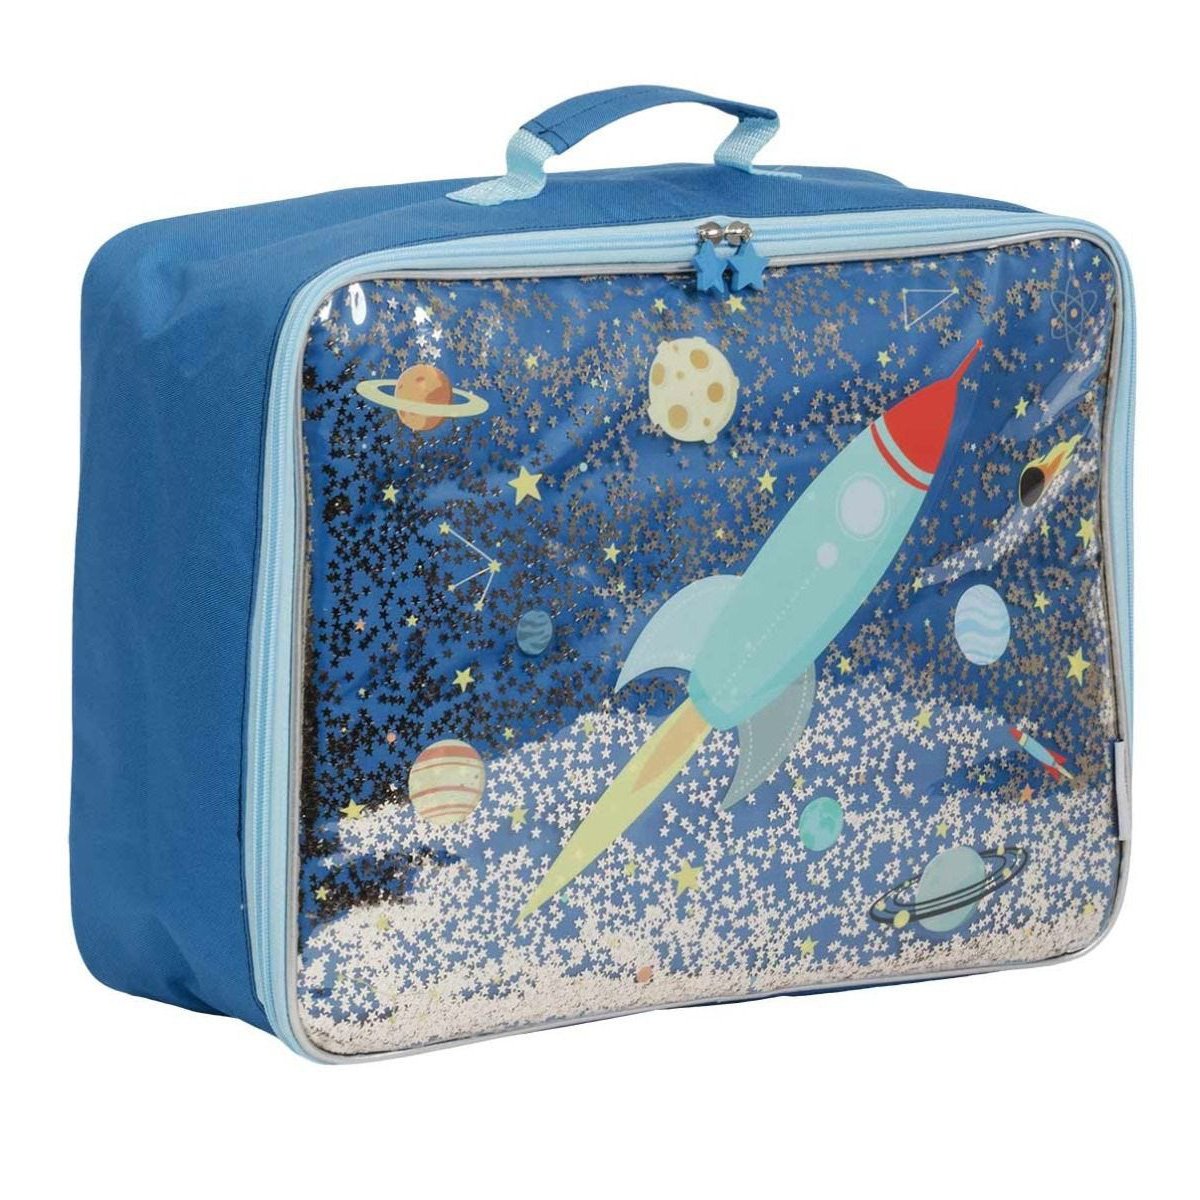 a-little-lovely-company-suitcase-glitter-space- (2)